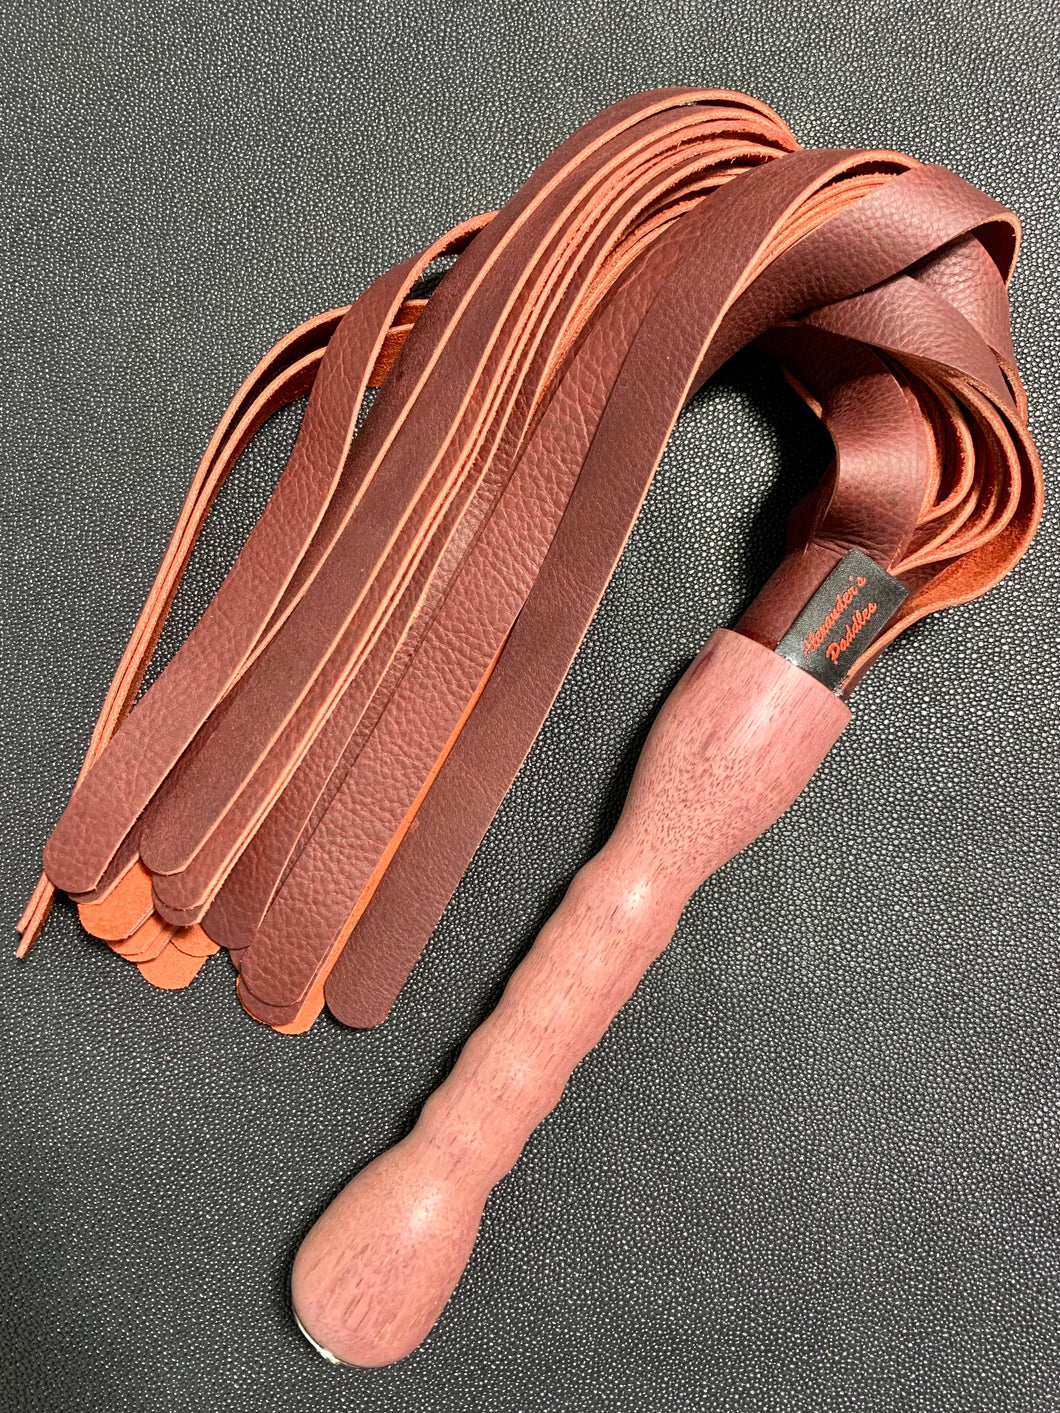 Flogger: Red Oilskin Leather with Purpleheart Handle